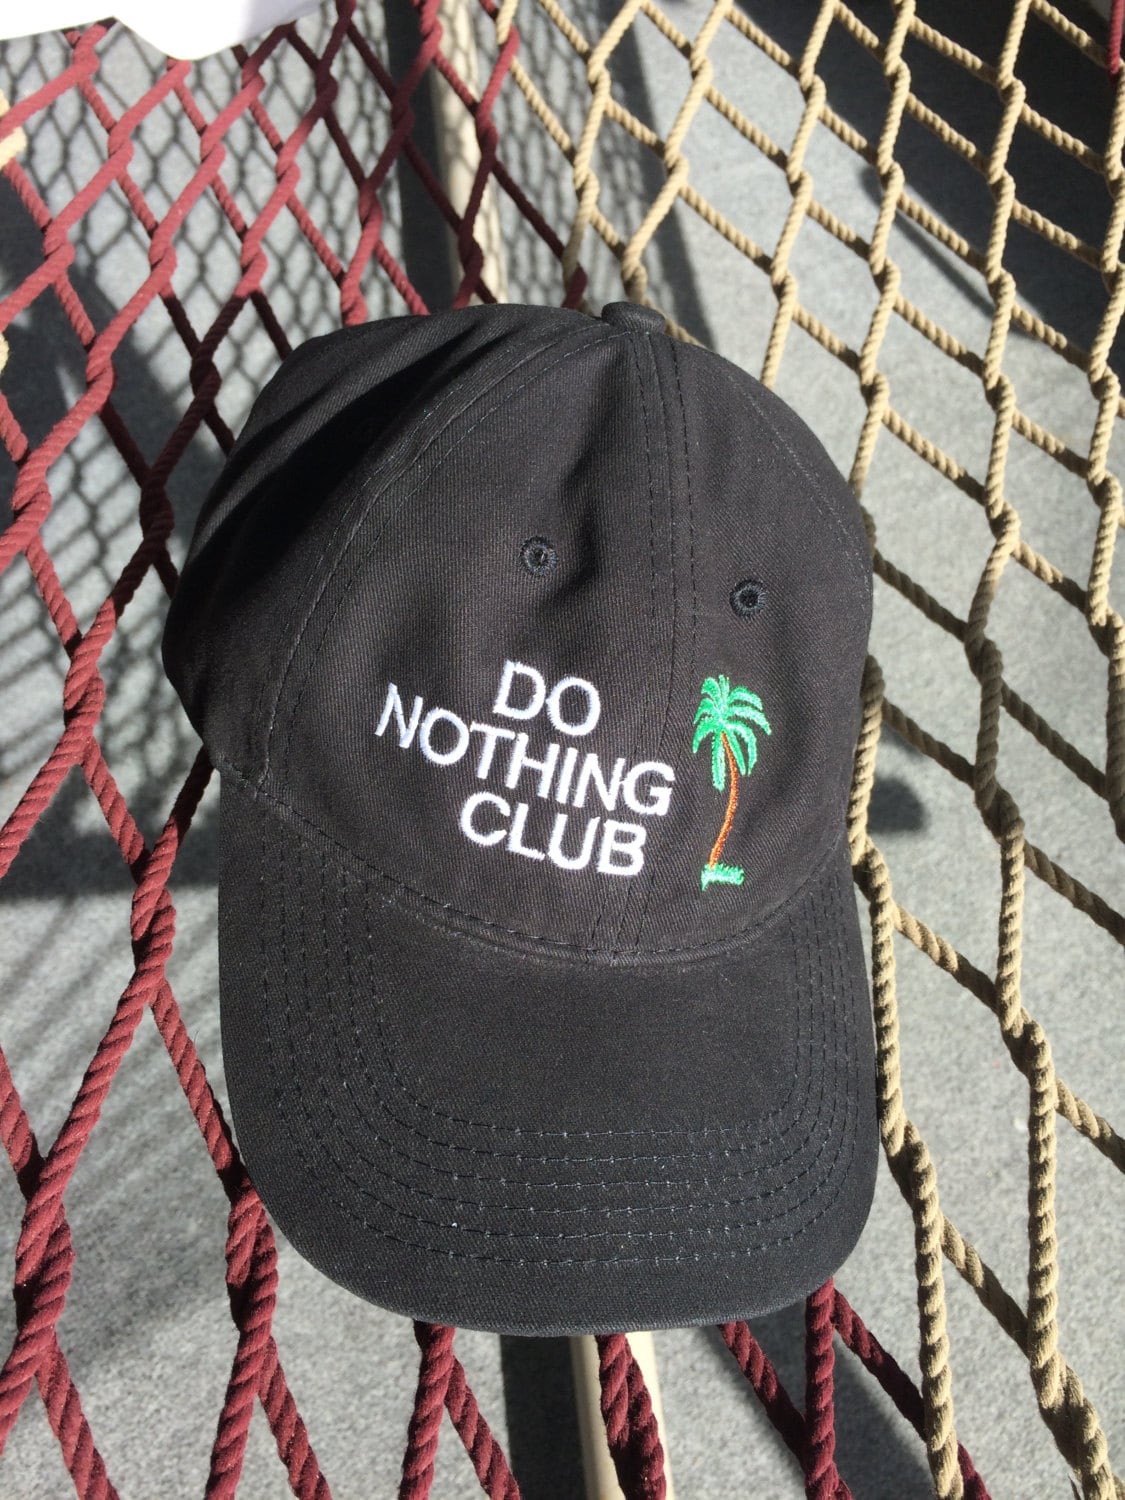 Do Nothing Club Black Cap With White Letters - Etsy Australia